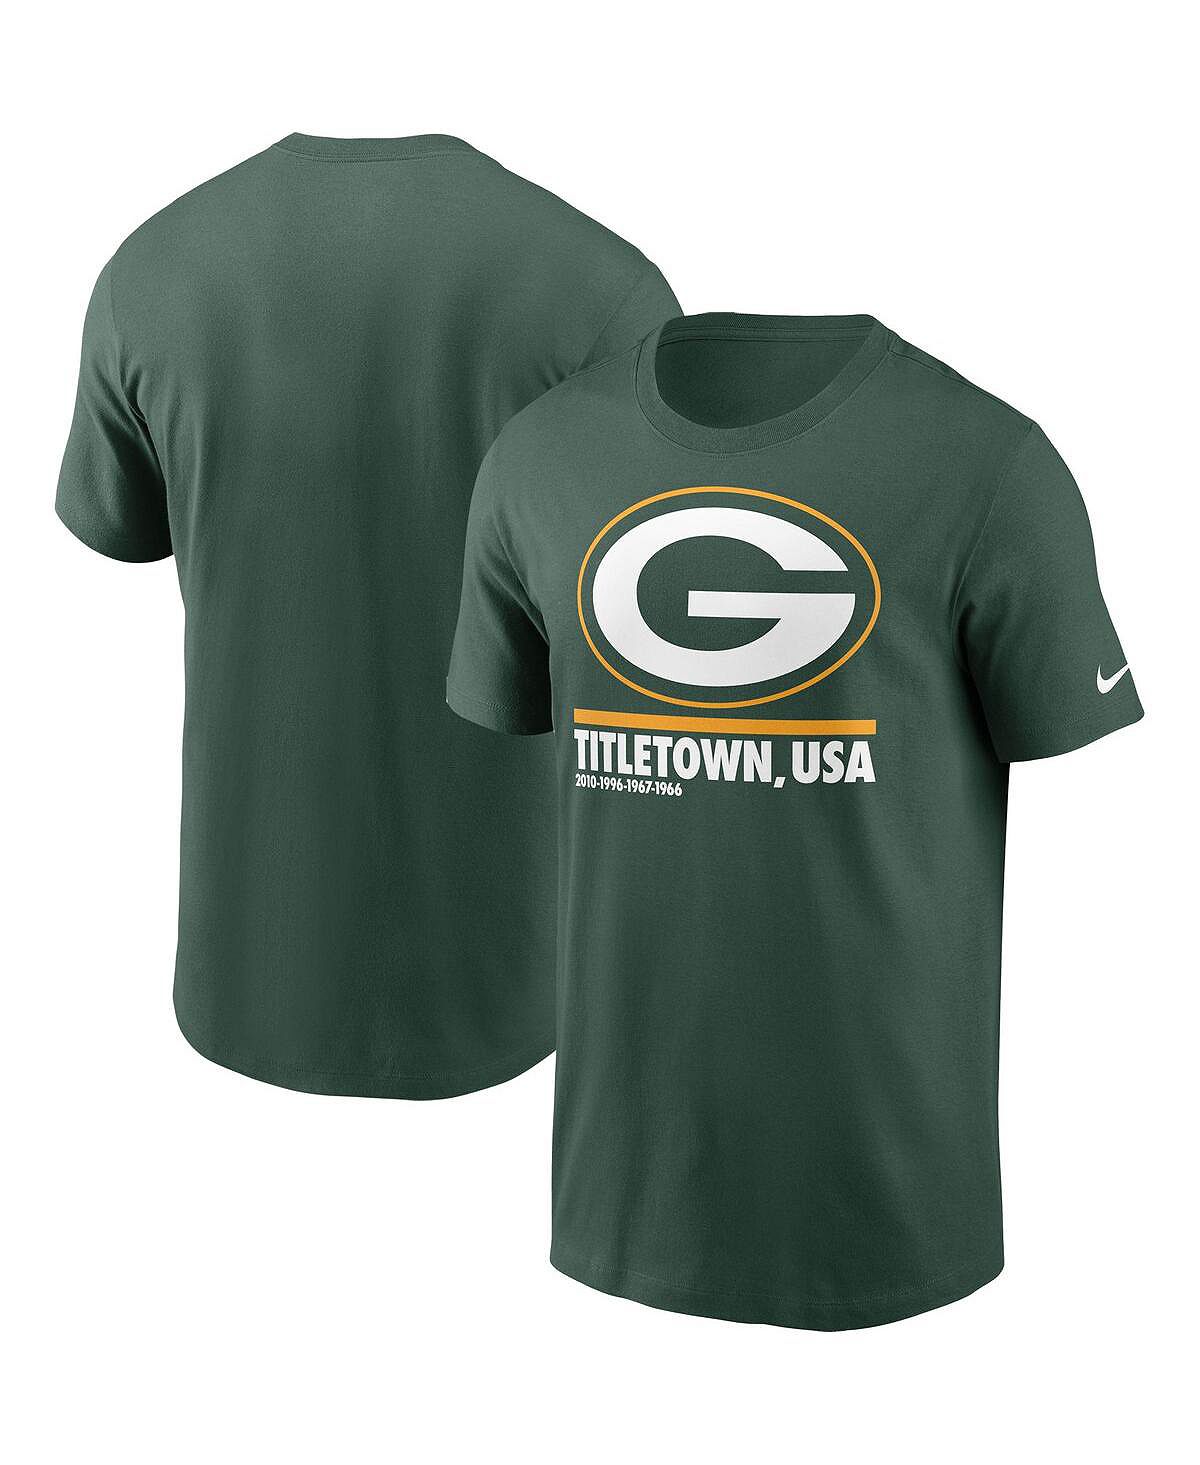 мужская футболка jaire alexander green green bay packers game team nike зеленый Мужская футболка green green bay packers hometown collection title town Nike, зеленый